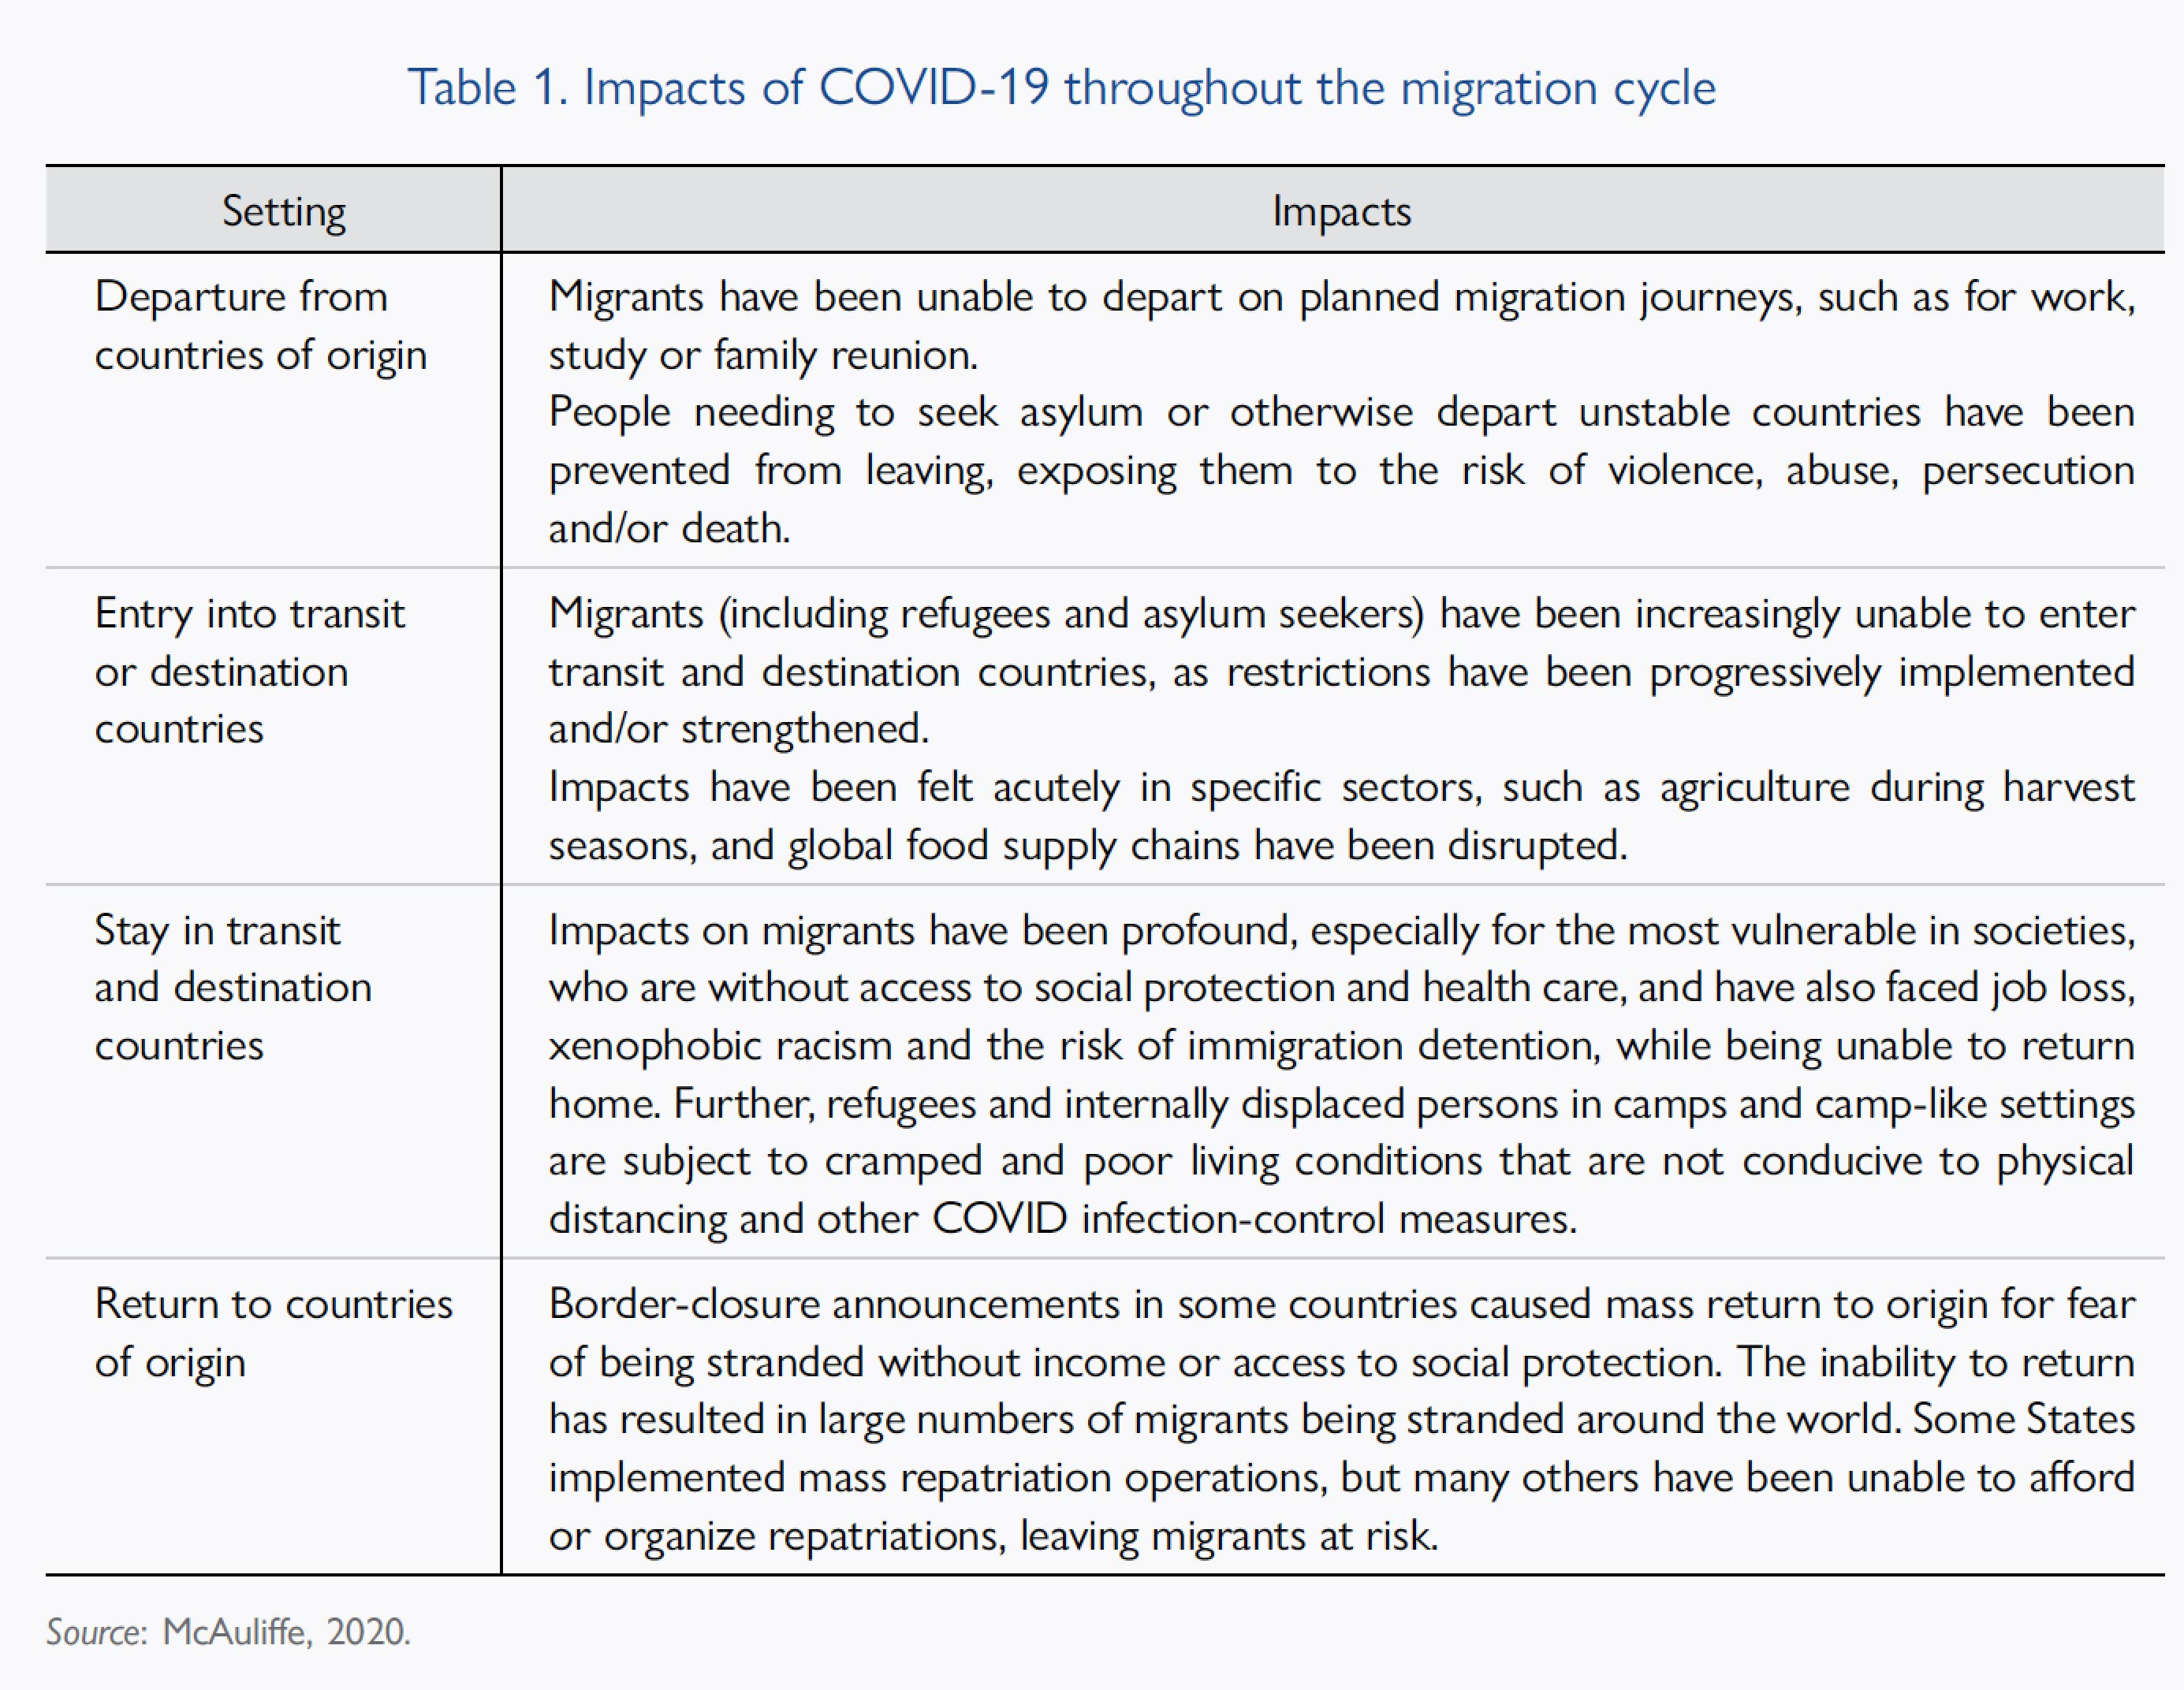 Impacts of COVID-19 throughout the migration cycle